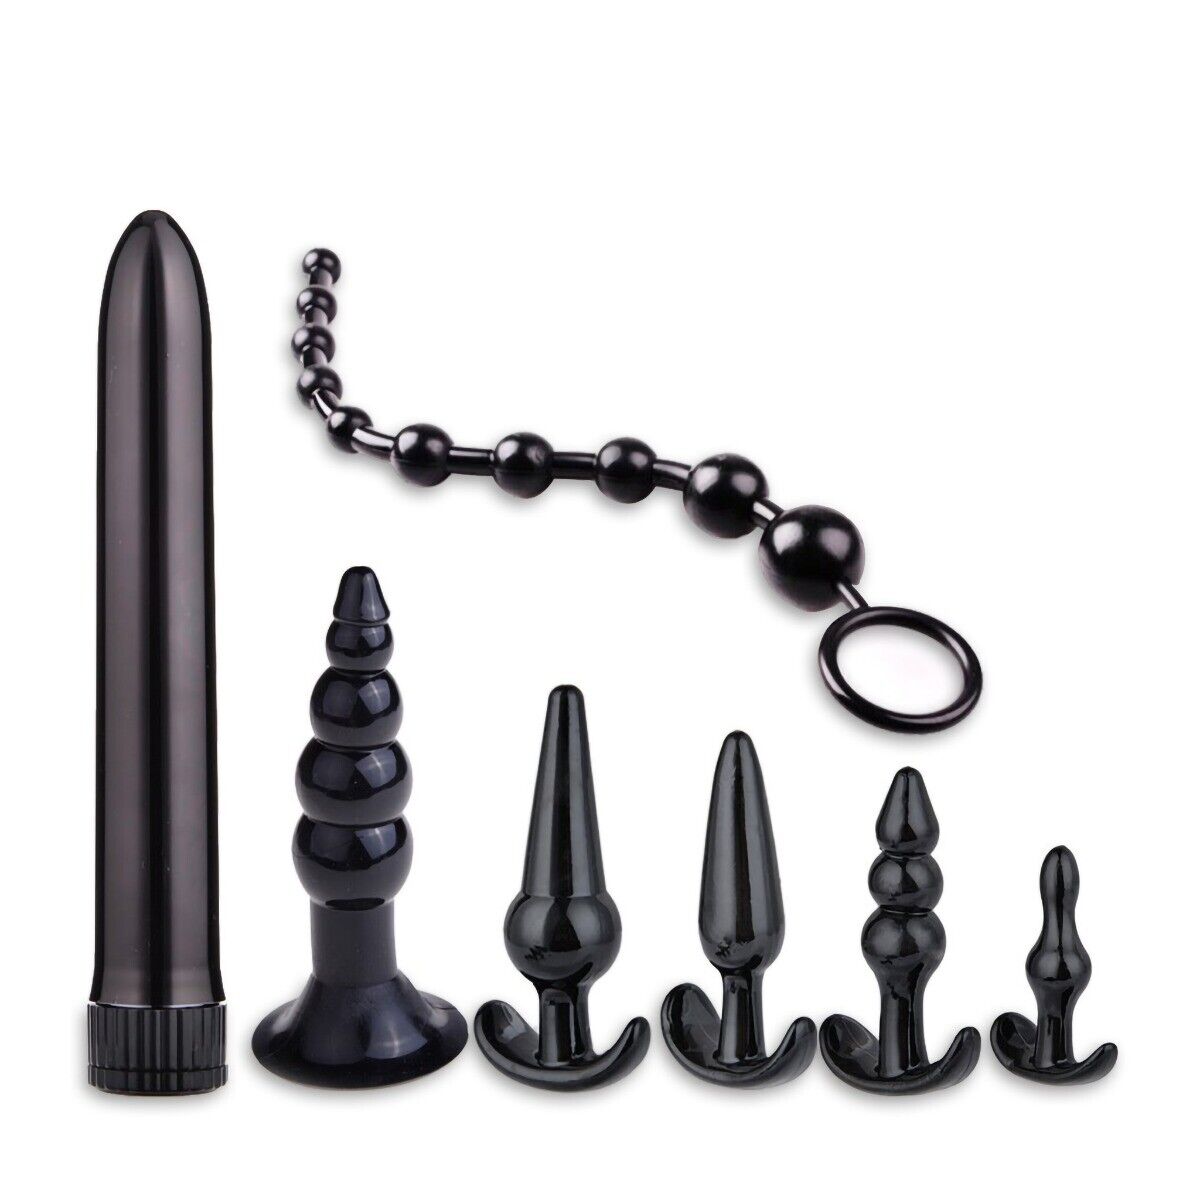 7 Piece Anal Play Kit Anal Trainer Beads Butt Plug Vibrator Sex Toys for Couples